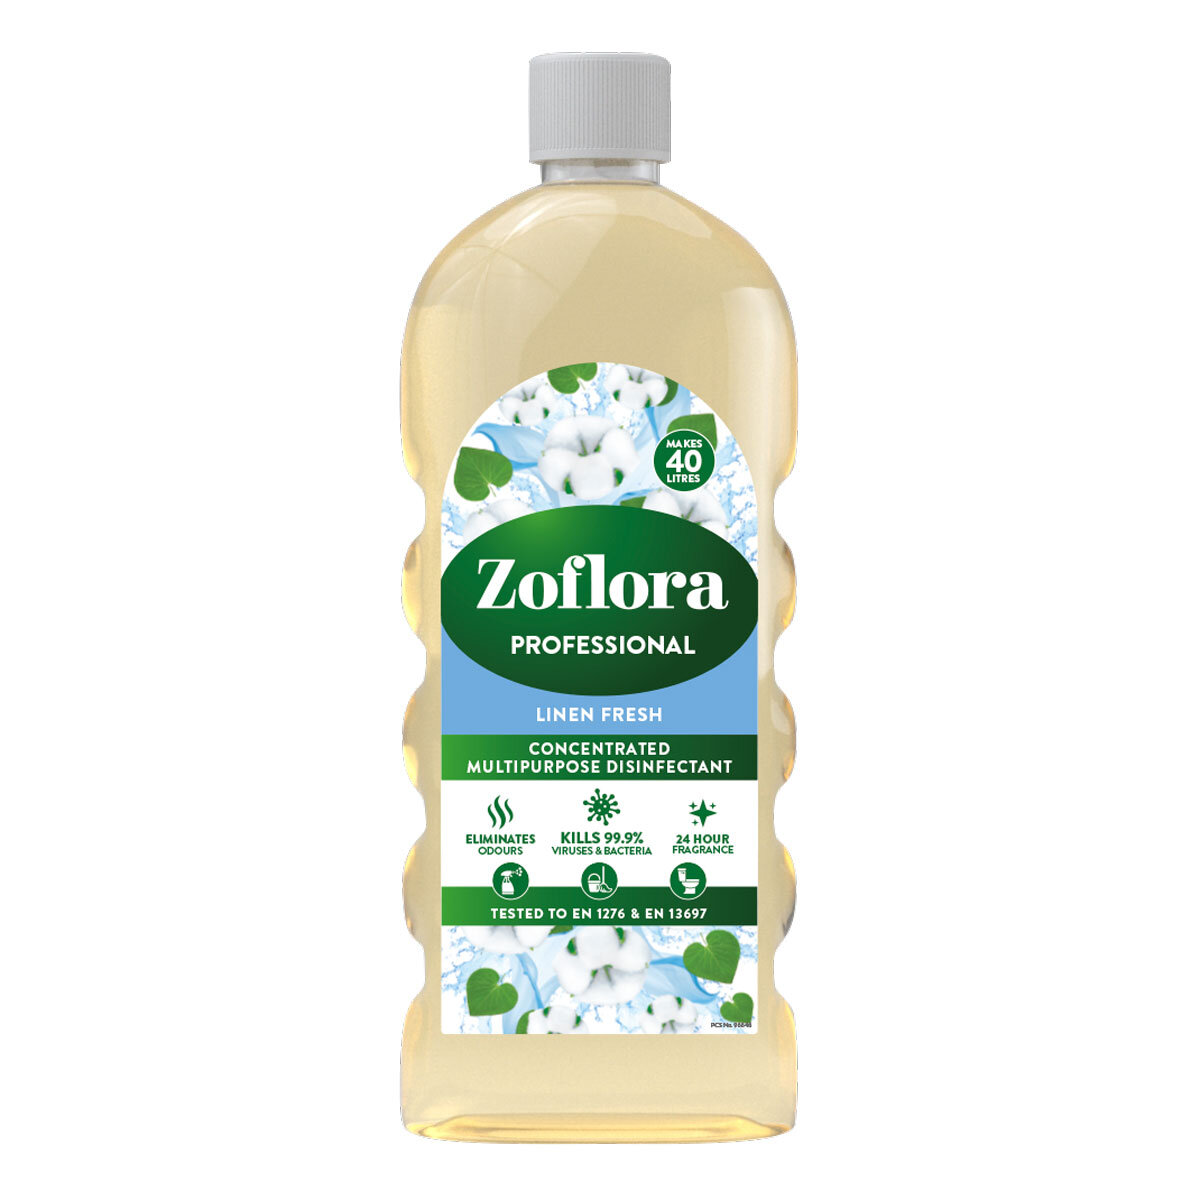 Zoflora Concentrated Disinfectant, 2 x 1L